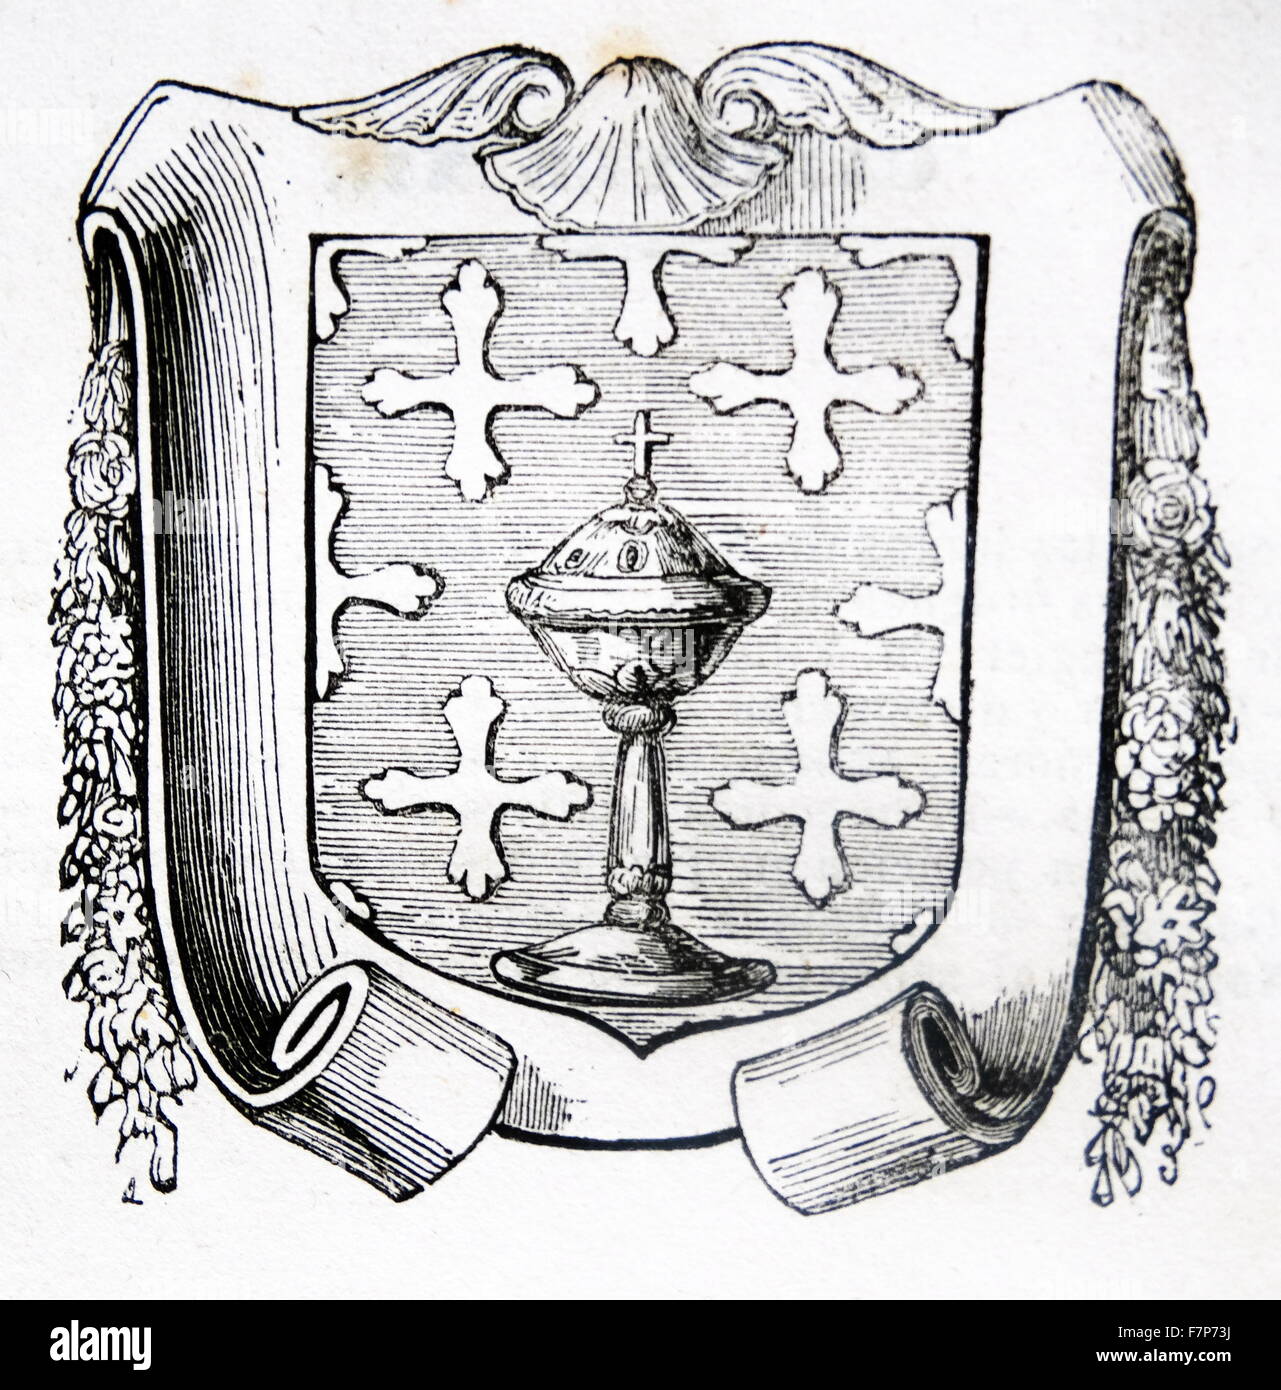 Engraving depicting the coat of arms of Galicia which includes, an enclosed in a field of azure, a chalice of gold with a silver host, accompanied by seven silver crosses, three on each side and one in the center of the shield. Dated 17th Century Stock Photo